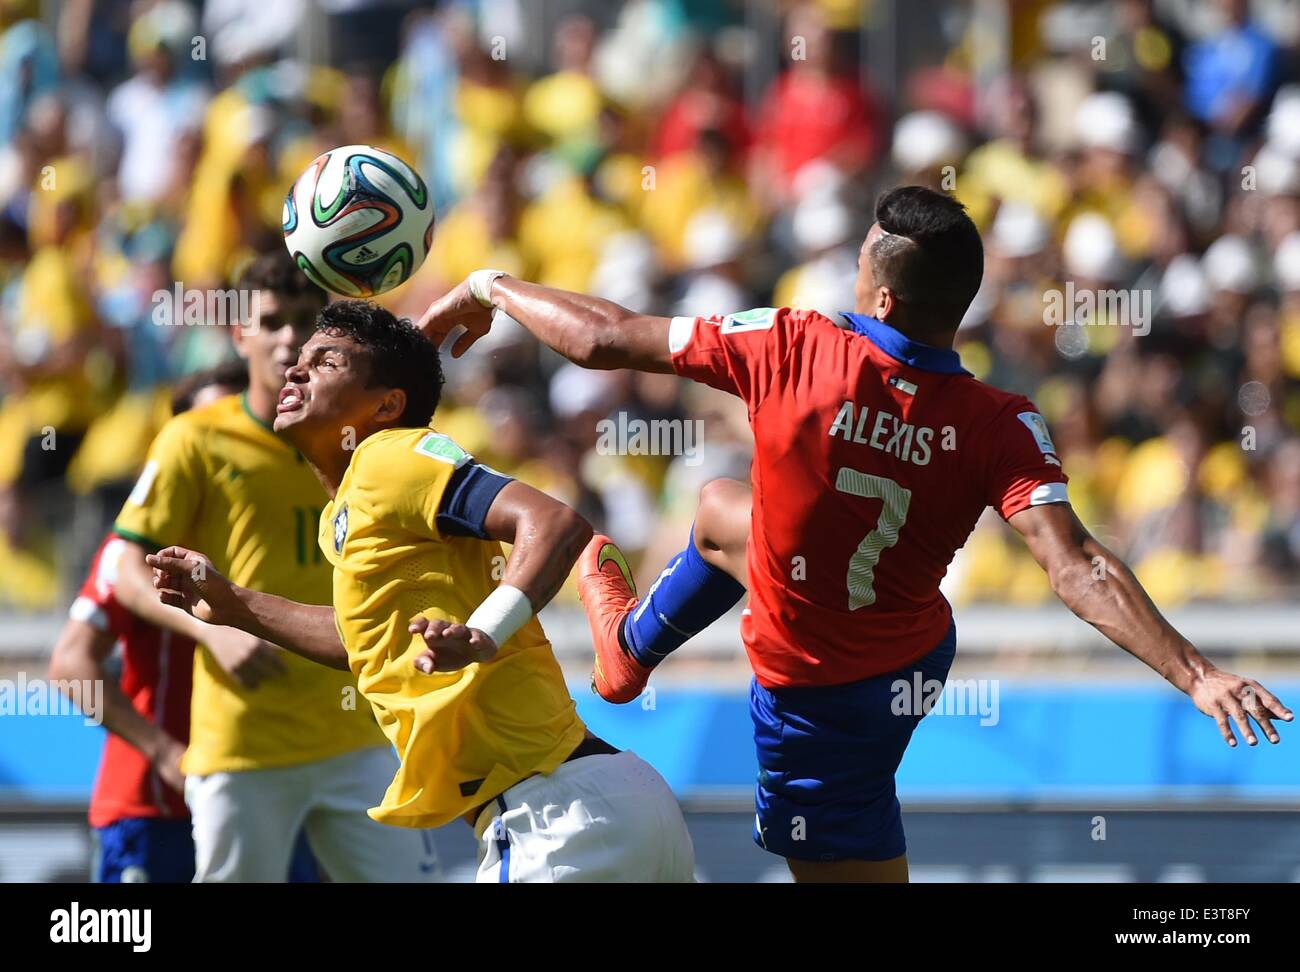 Belo Horizonte, Brazil. 28th June, 2014. Brazil's Thiago Silva vies with Chile's Alexis Sanchez during a Round of 16 match between Brazil and Chile of 2014 FIFA World Cup at the Estadio Mineirao Stadium in Belo Horizonte, Brazil, on June 28, 2014. Credit:  Liu Dawei/Xinhua/Alamy Live News Stock Photo